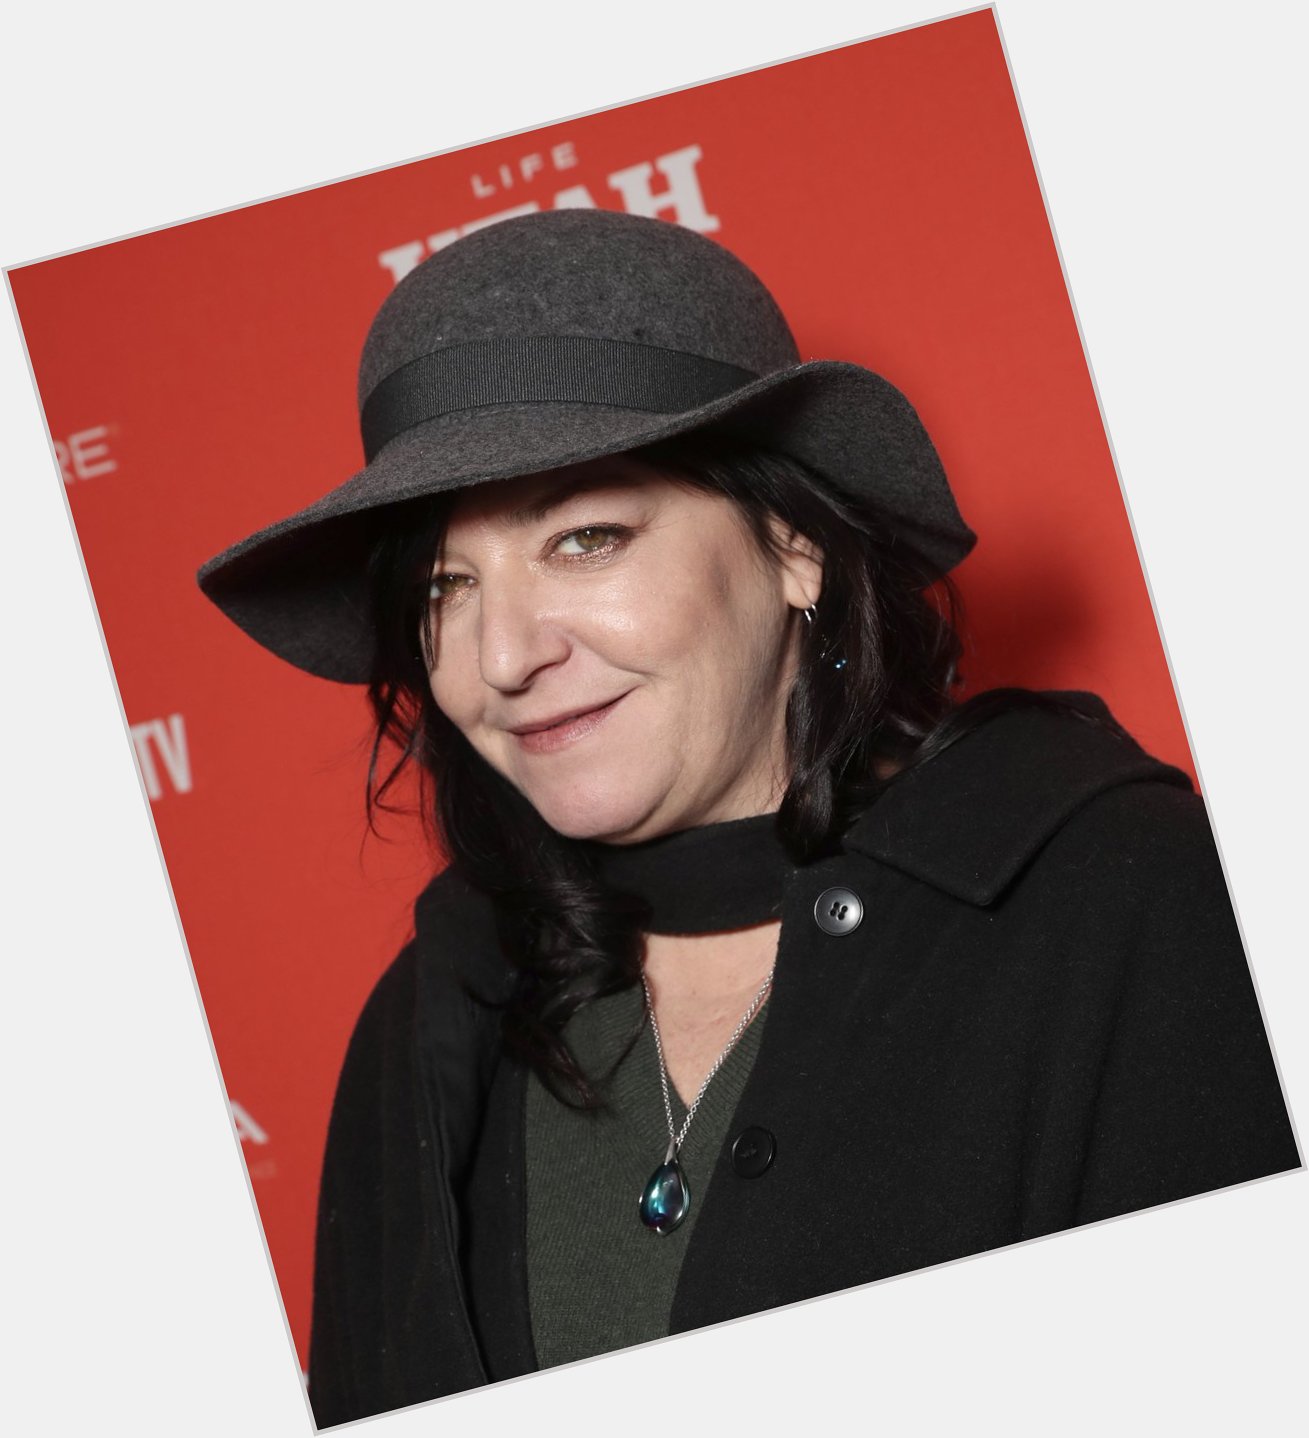 Happy birthday to the one and only Lynne Ramsay, director of You Were Never Really Here. 